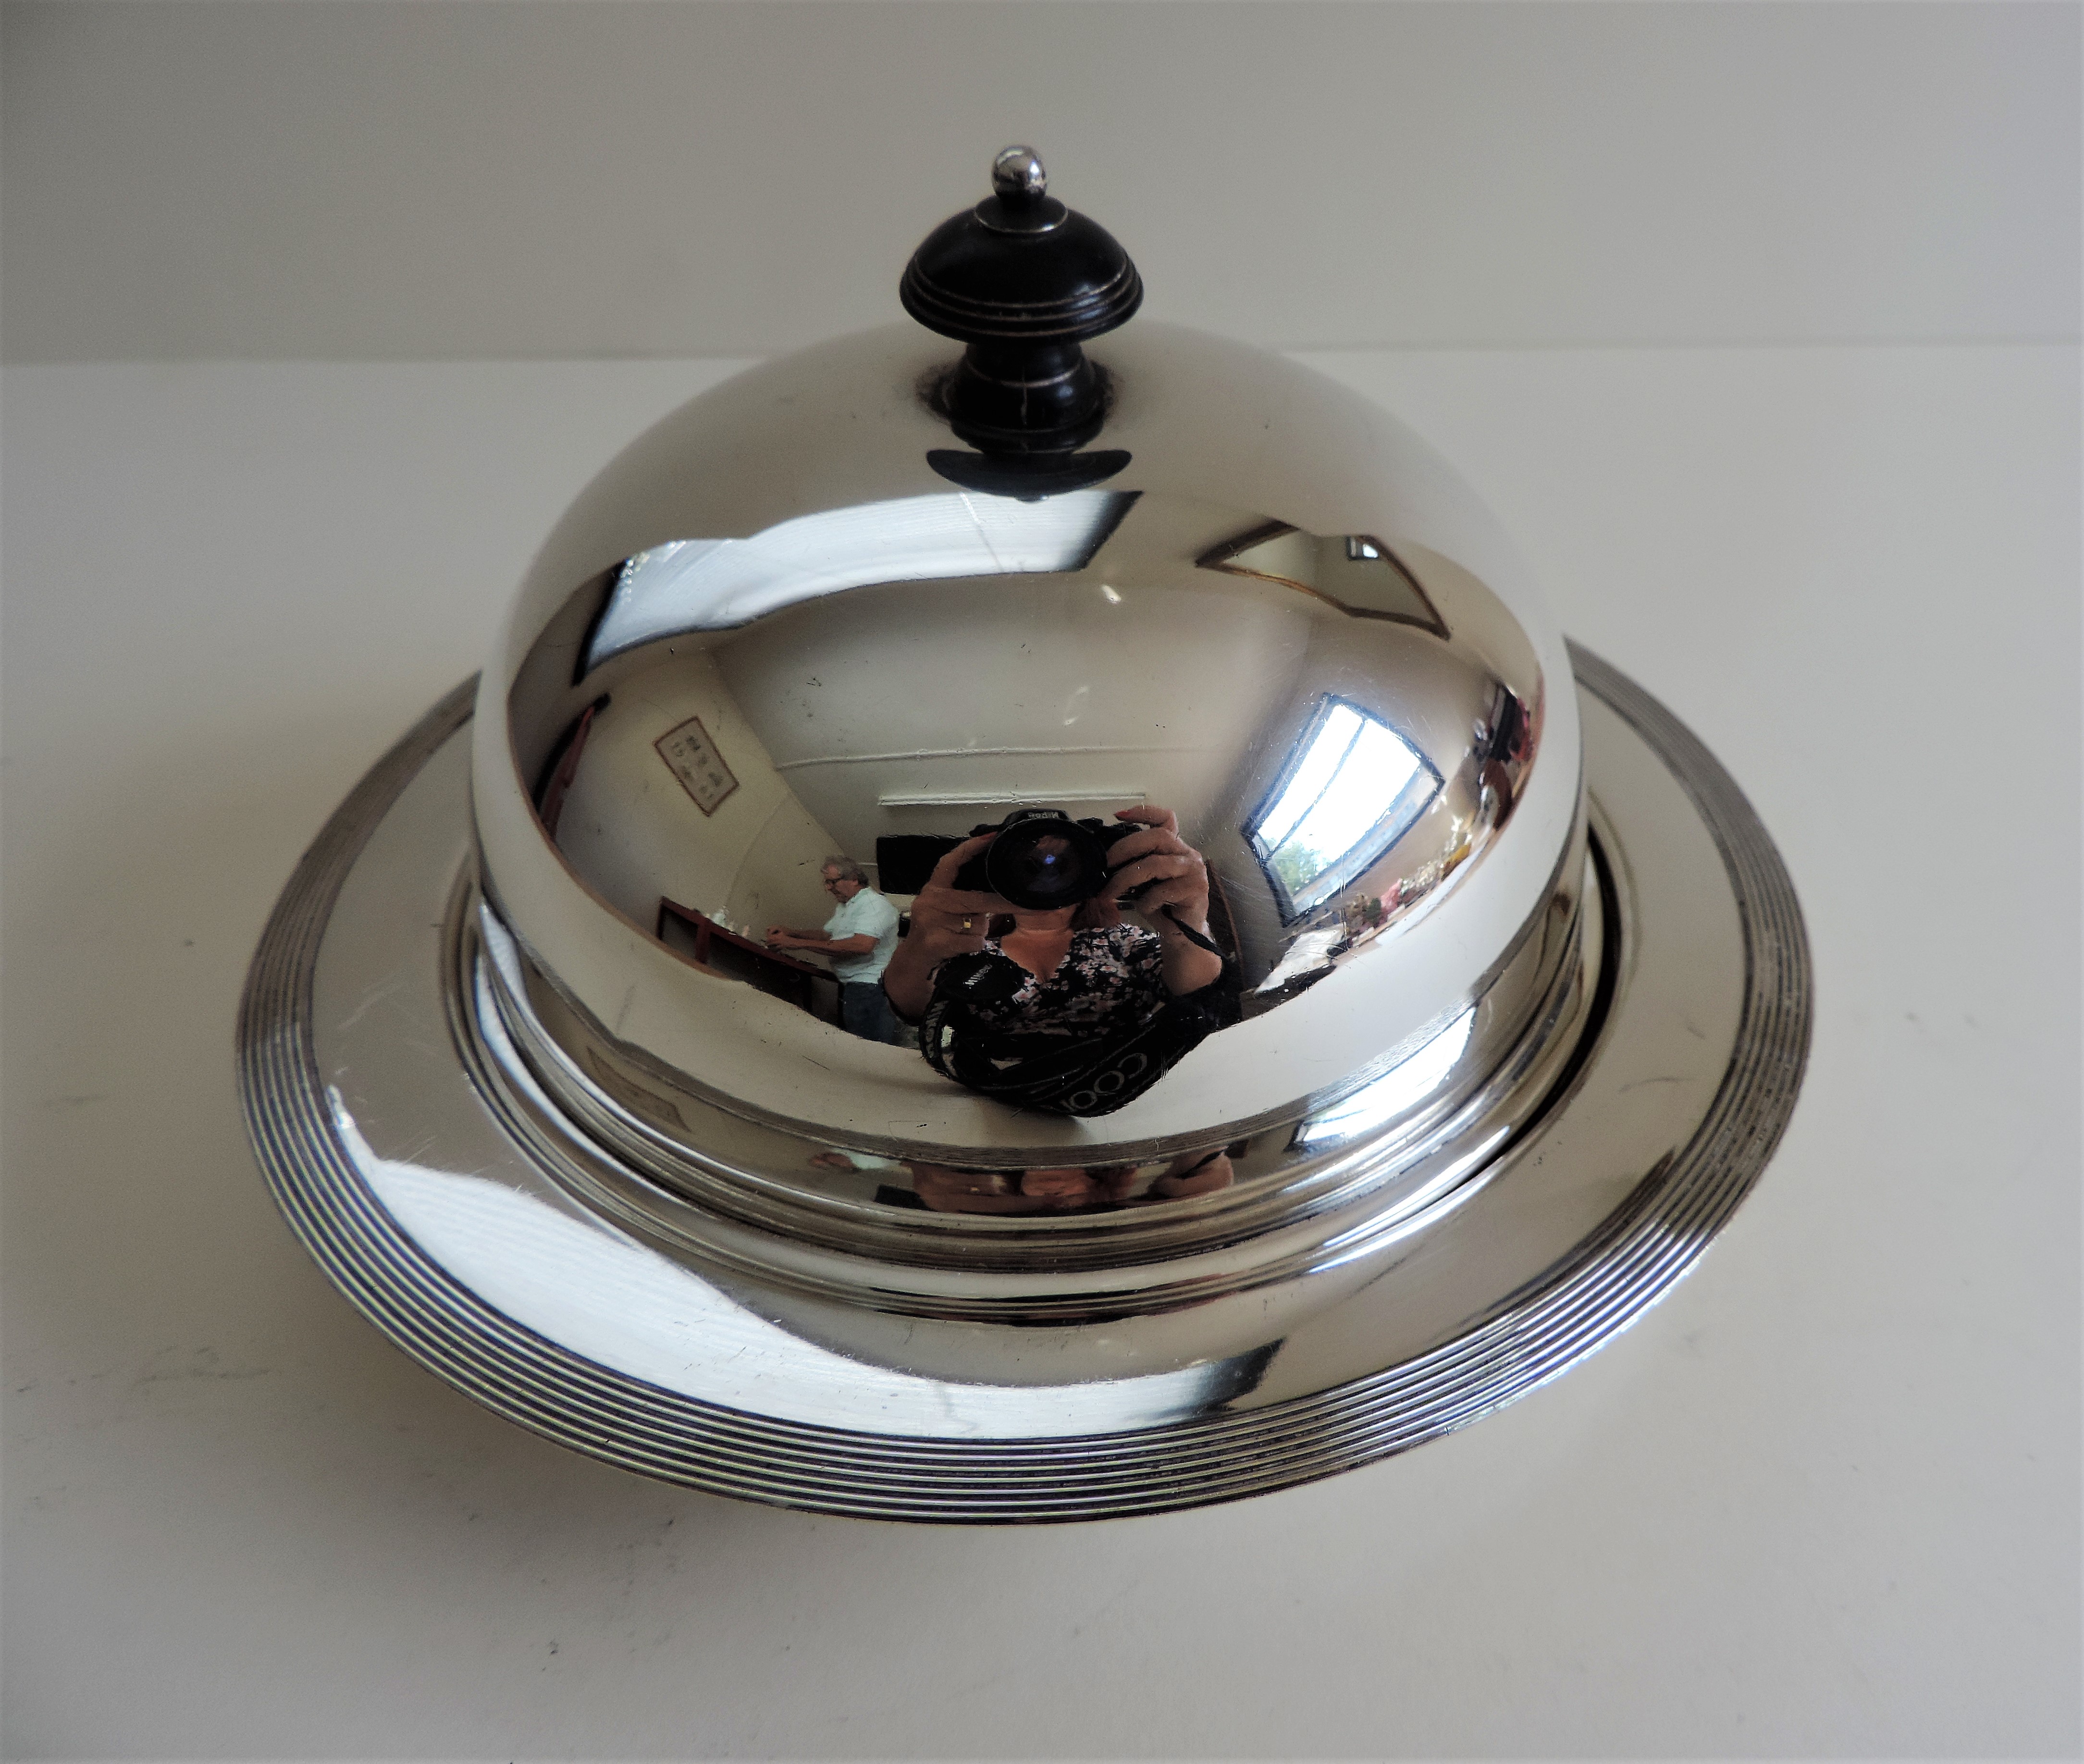 Antique Art Deco Silver Plated Muffin Dish/Warmer - Image 6 of 6